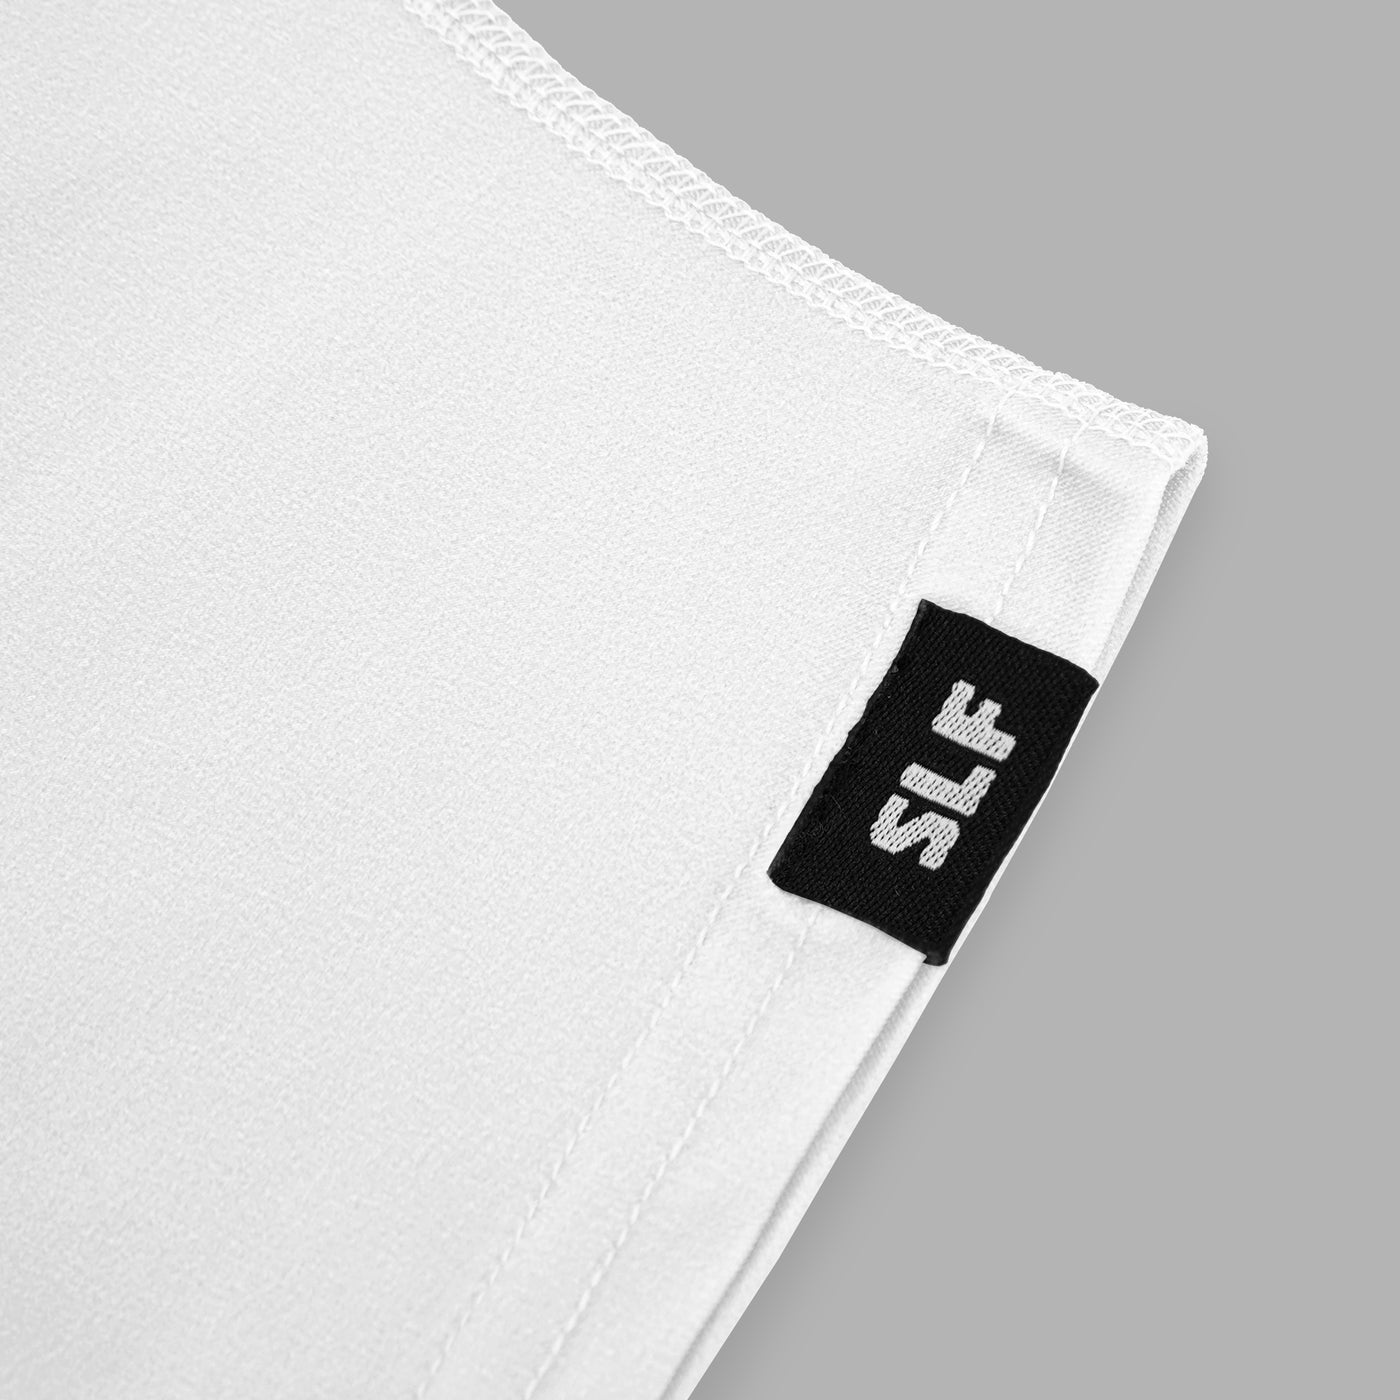 Basic White Spats / Cleat Covers - Big